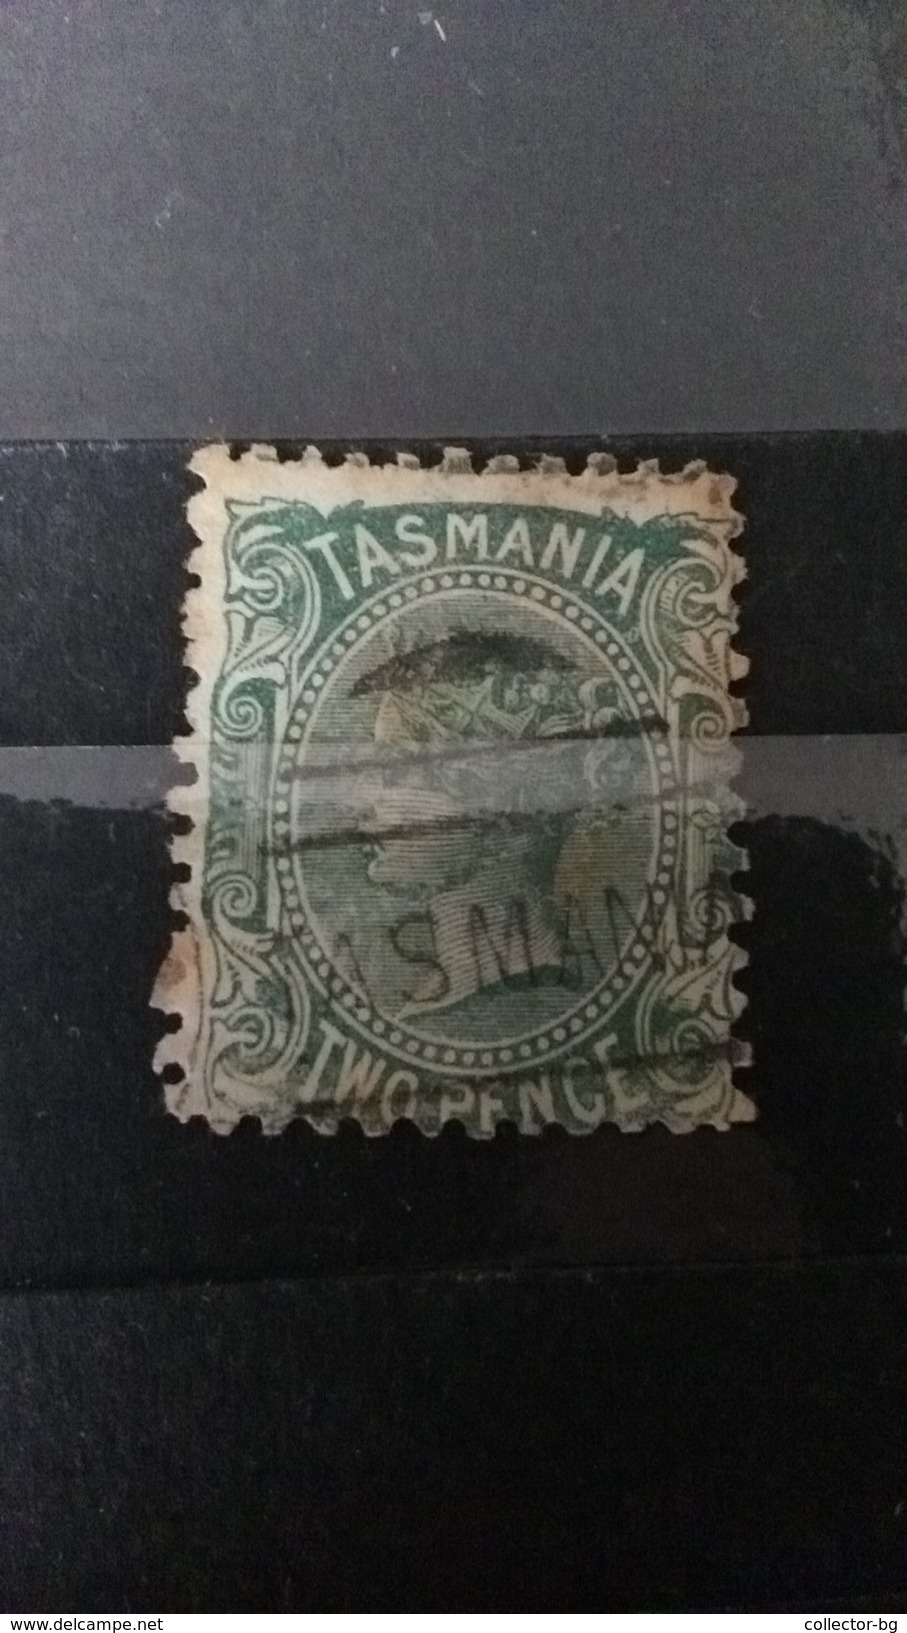 RARE 1870-1900 TWO PENCE QUEEN VICTORIA GREEN WATERMARK SEAL "TASMANIA"  USED  STAMP TIMBRE - Usados